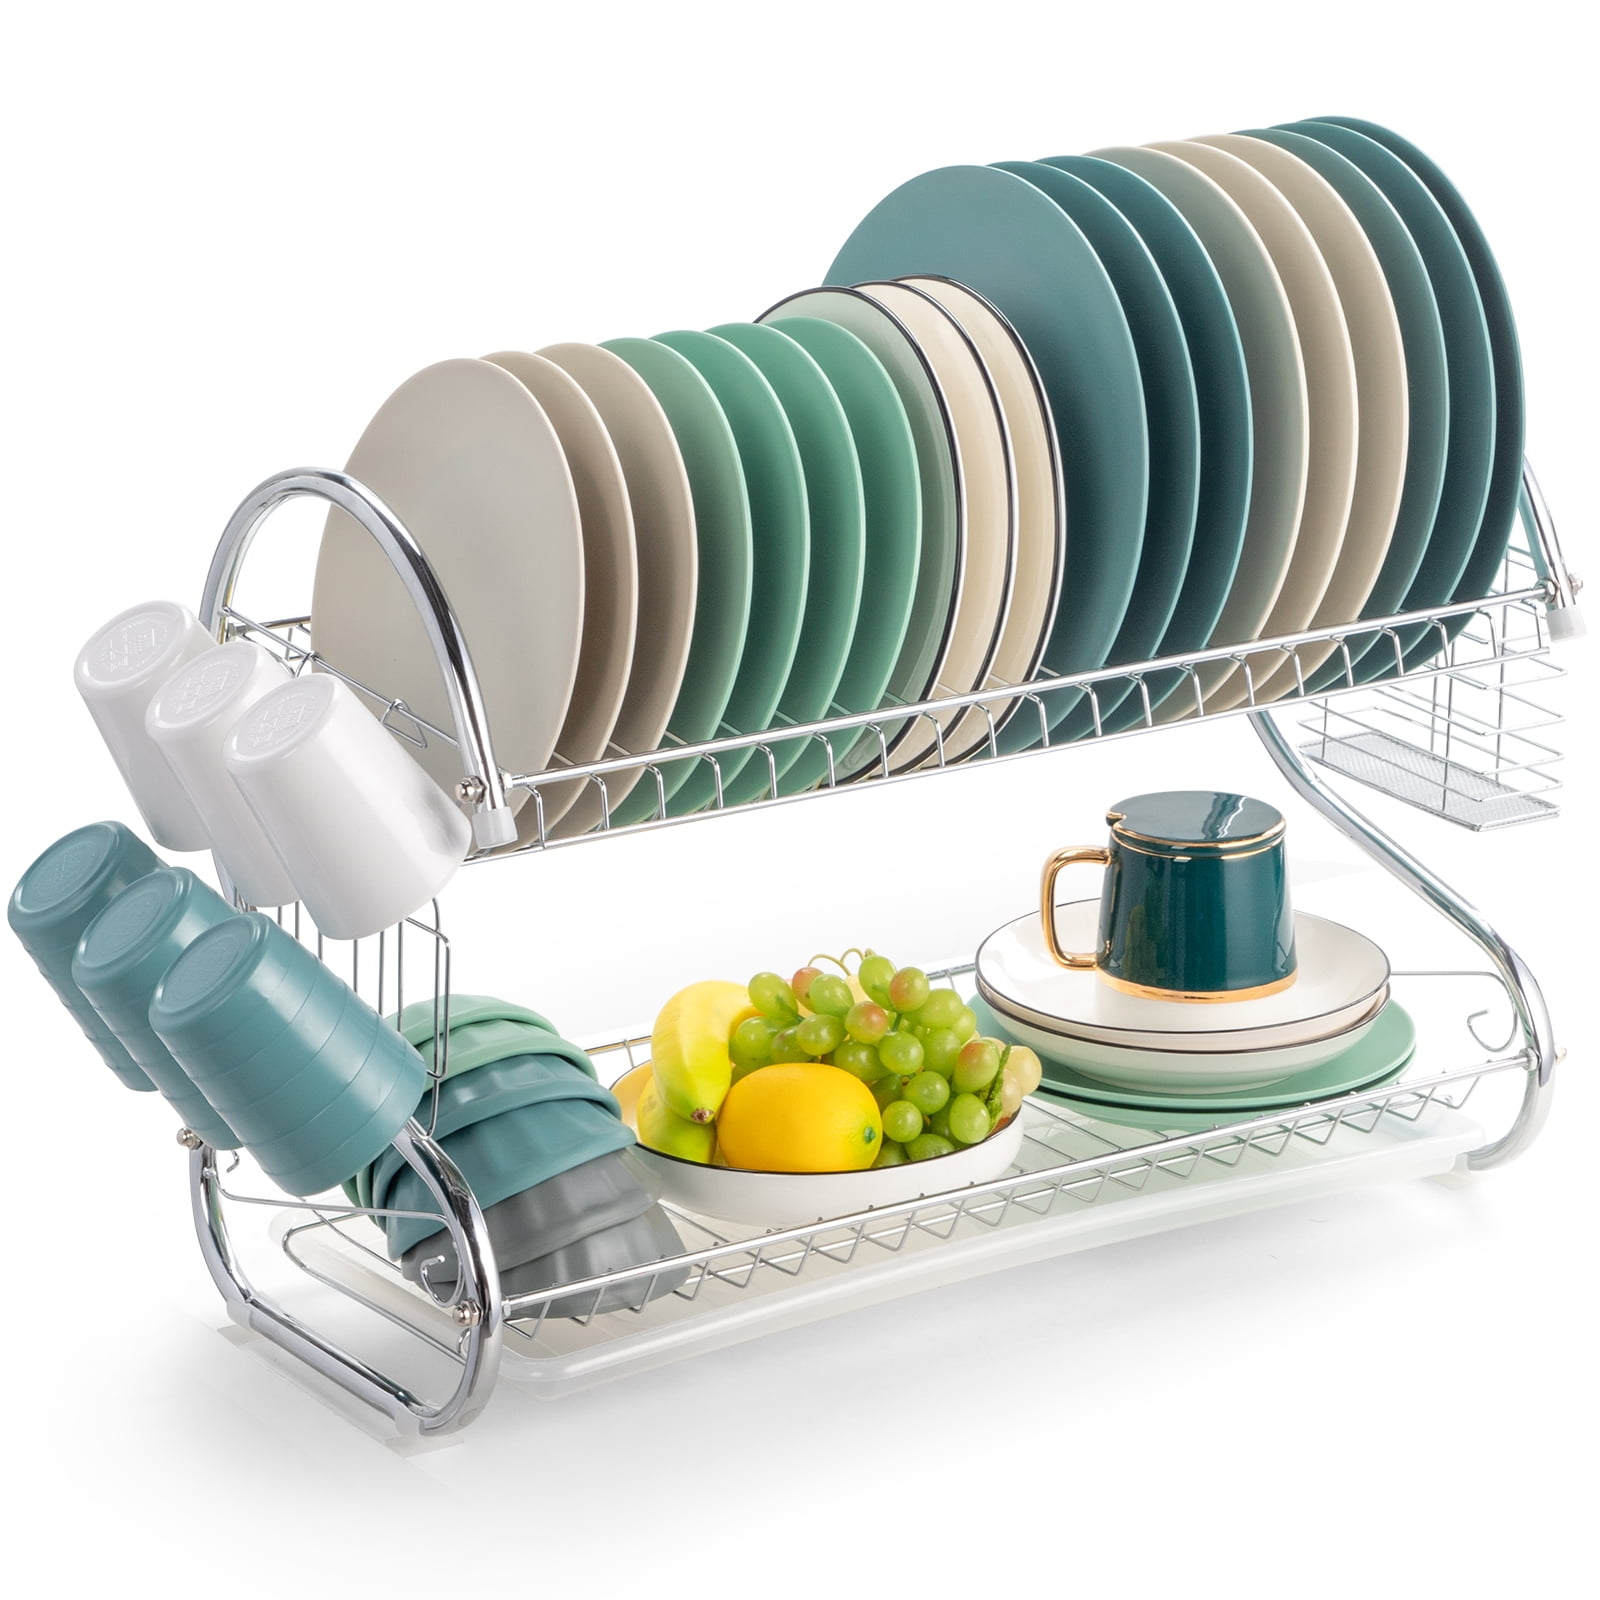 Lonian 2-Tier Drain Tray, Dish Drainer Drying Rack, Tea Tray for Cup Bowl  Fruit